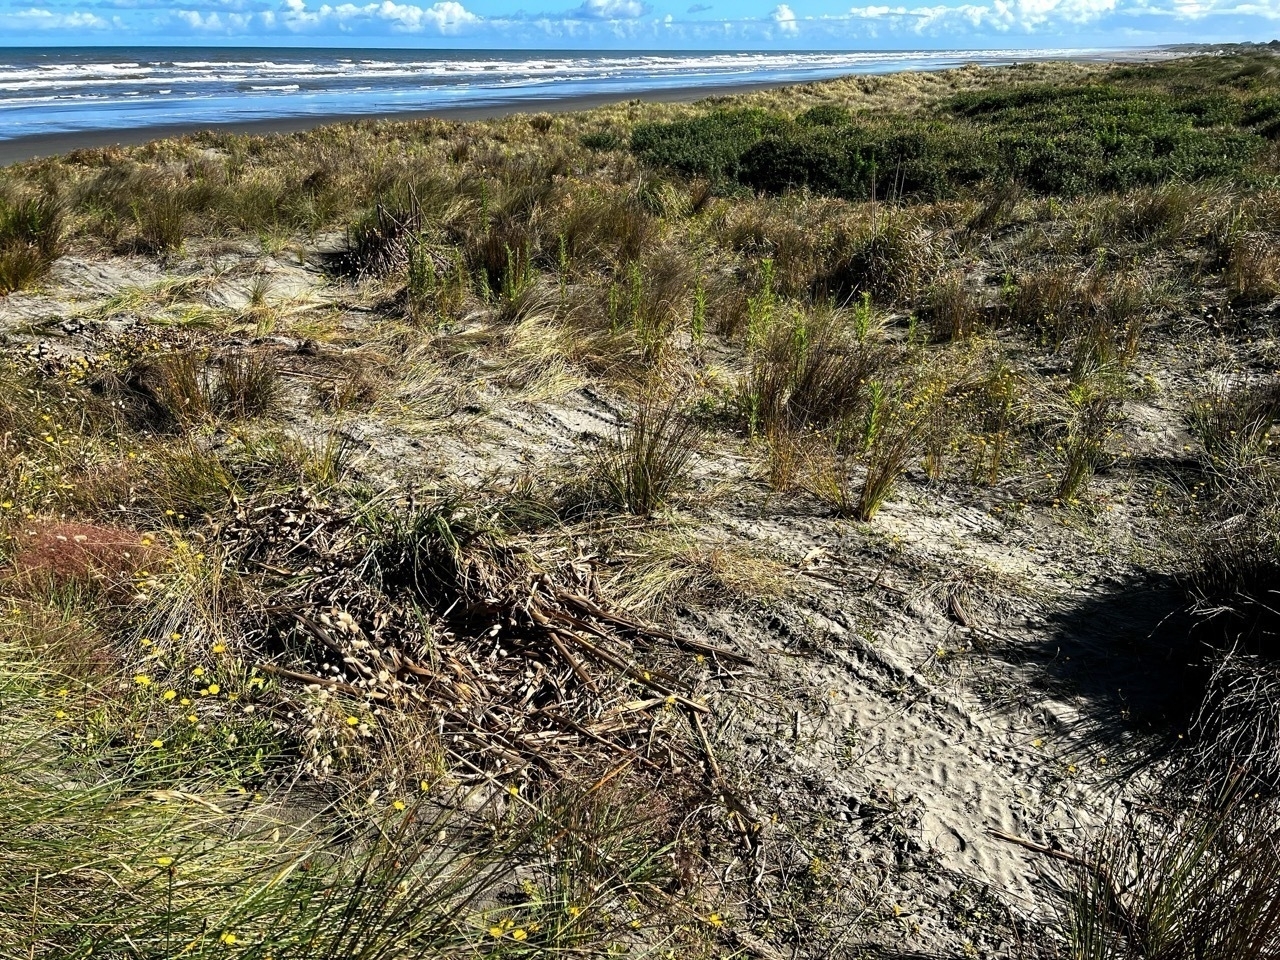 Tire tracks and flattened vegetation where the dune goes down to the beach. 